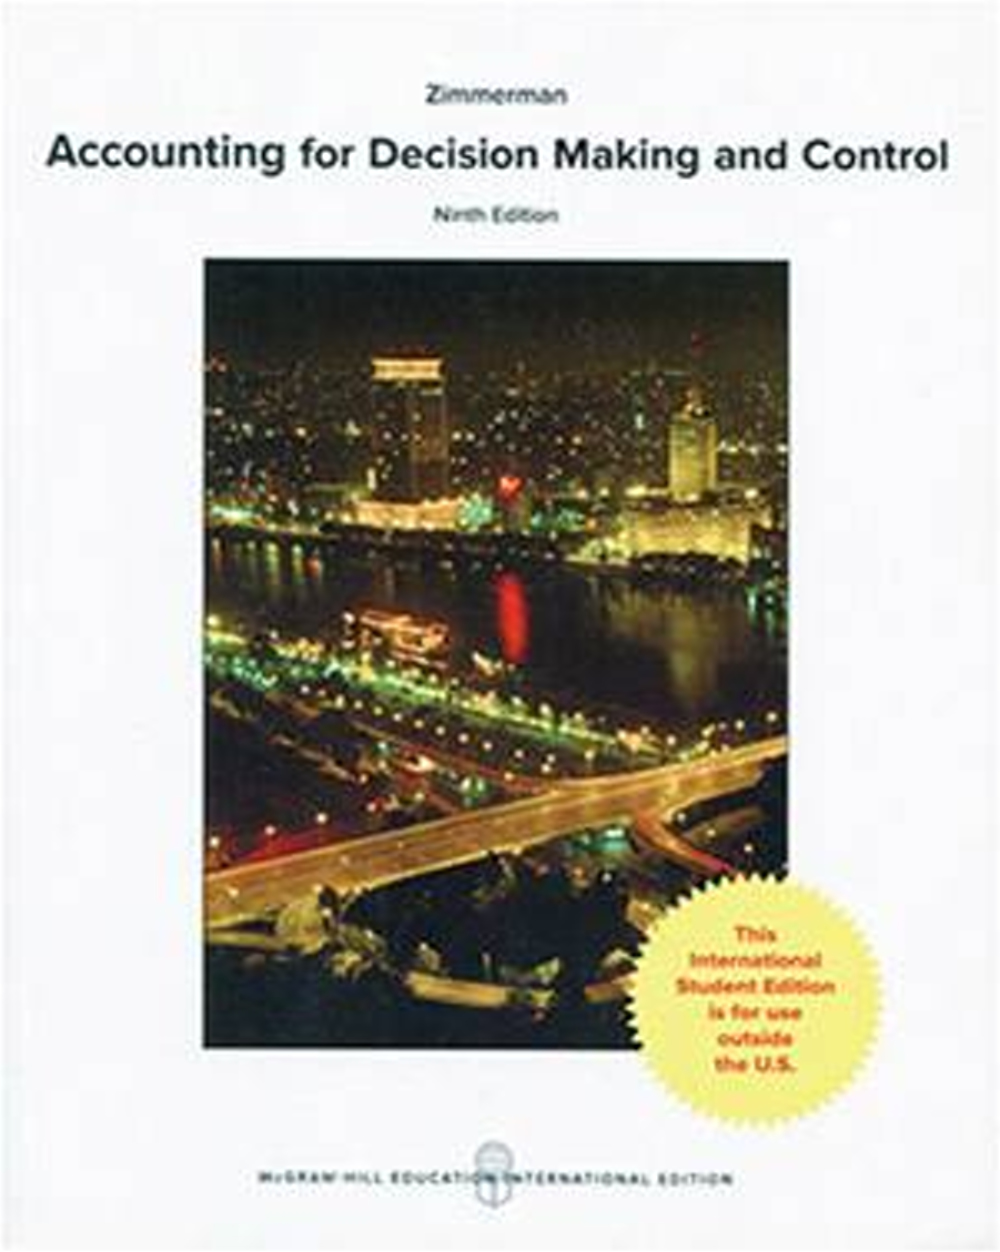 Accounting for Decision Making...